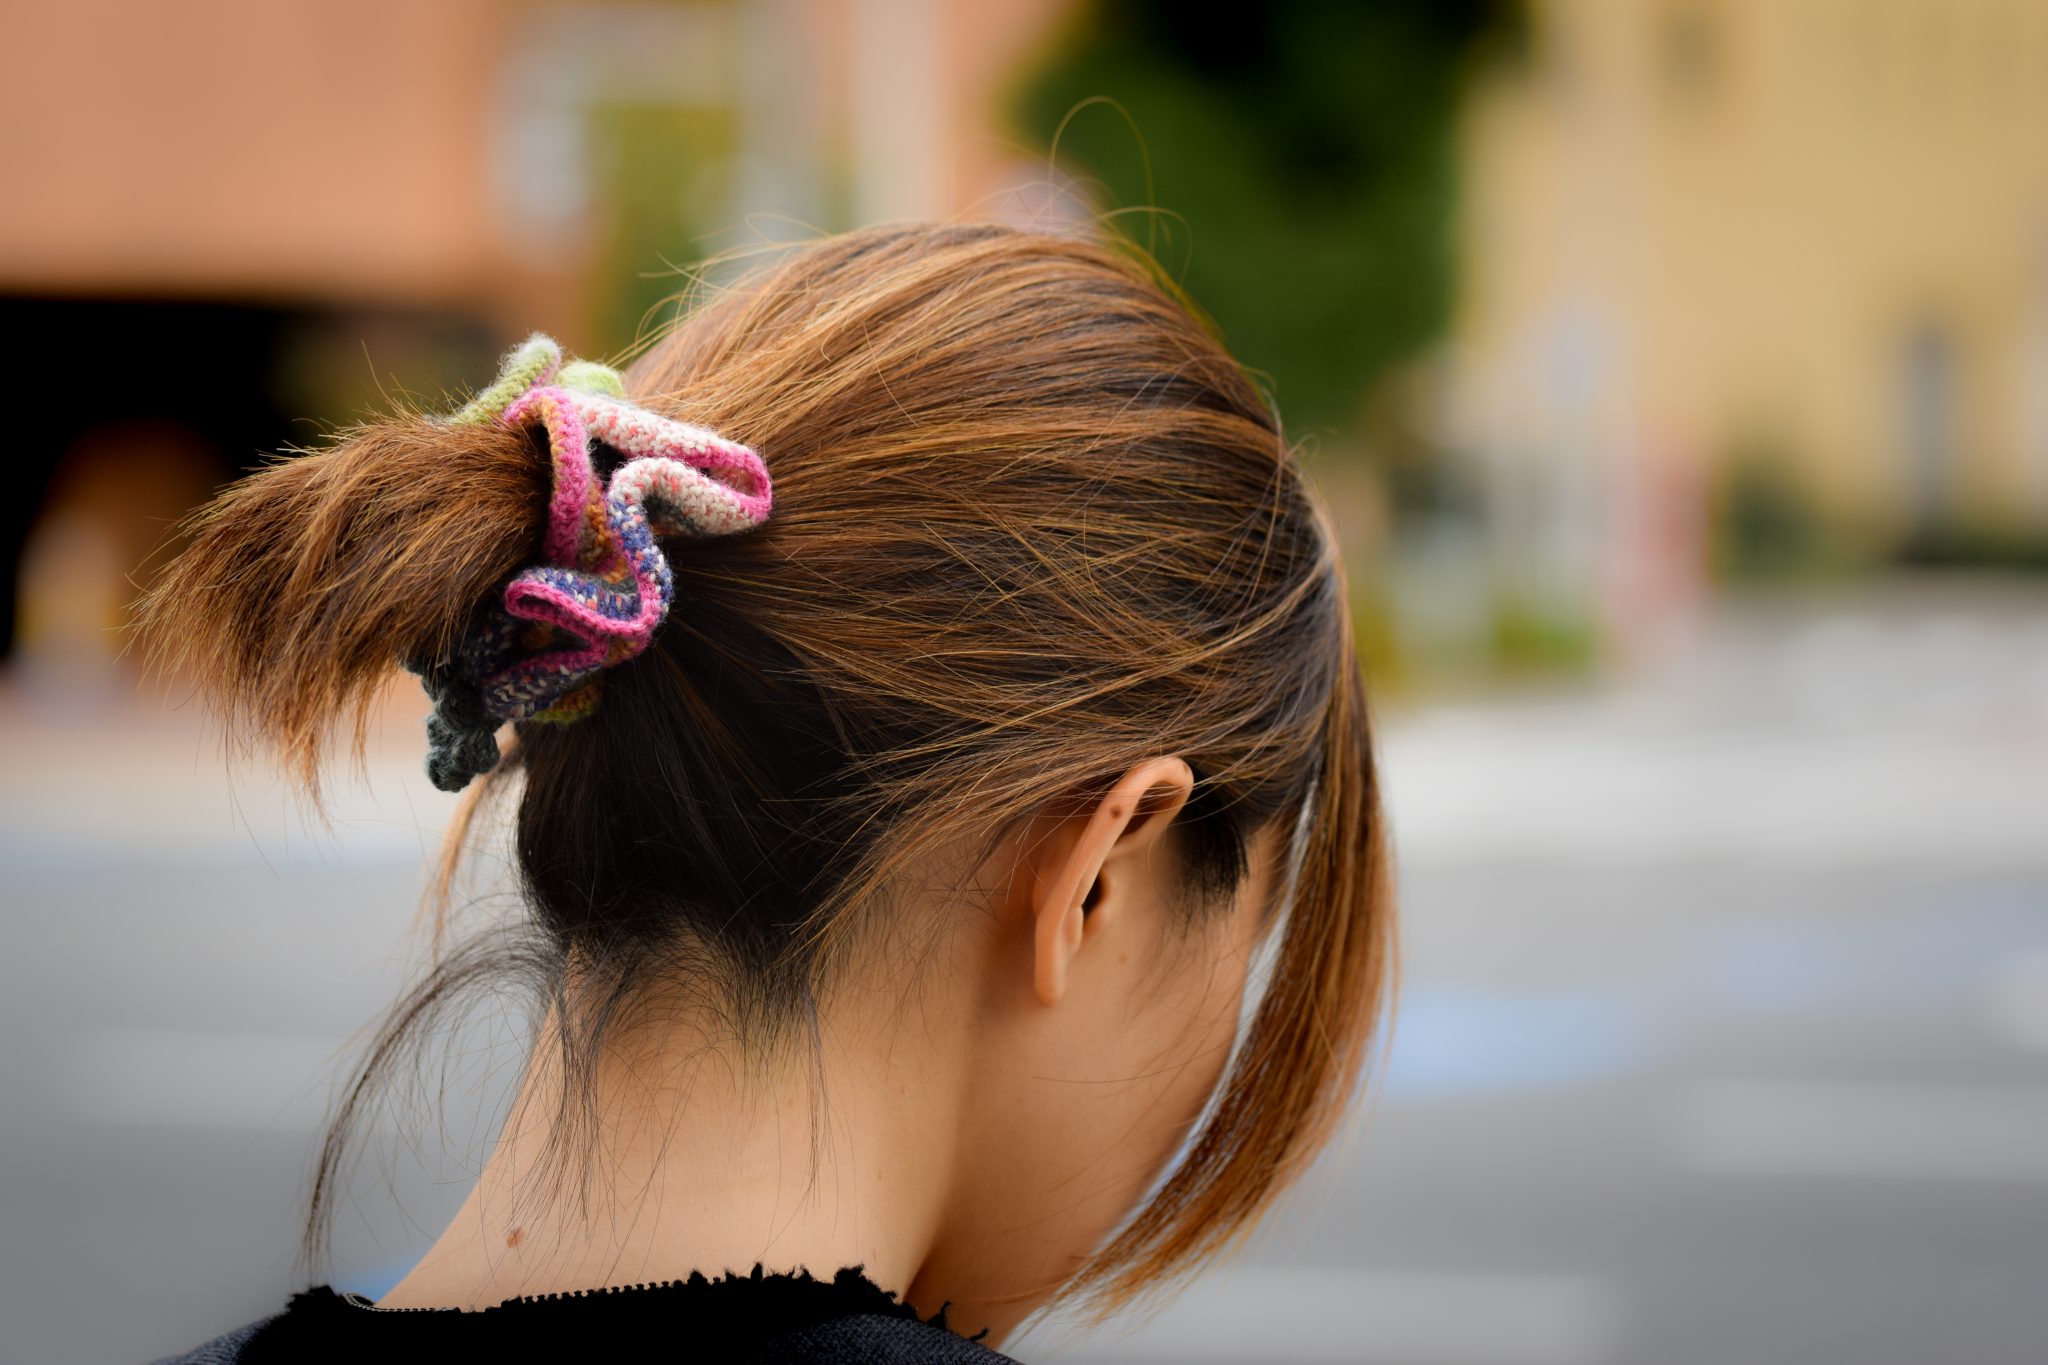 How To Choose The Best Hair Tie According To Your Hair Type